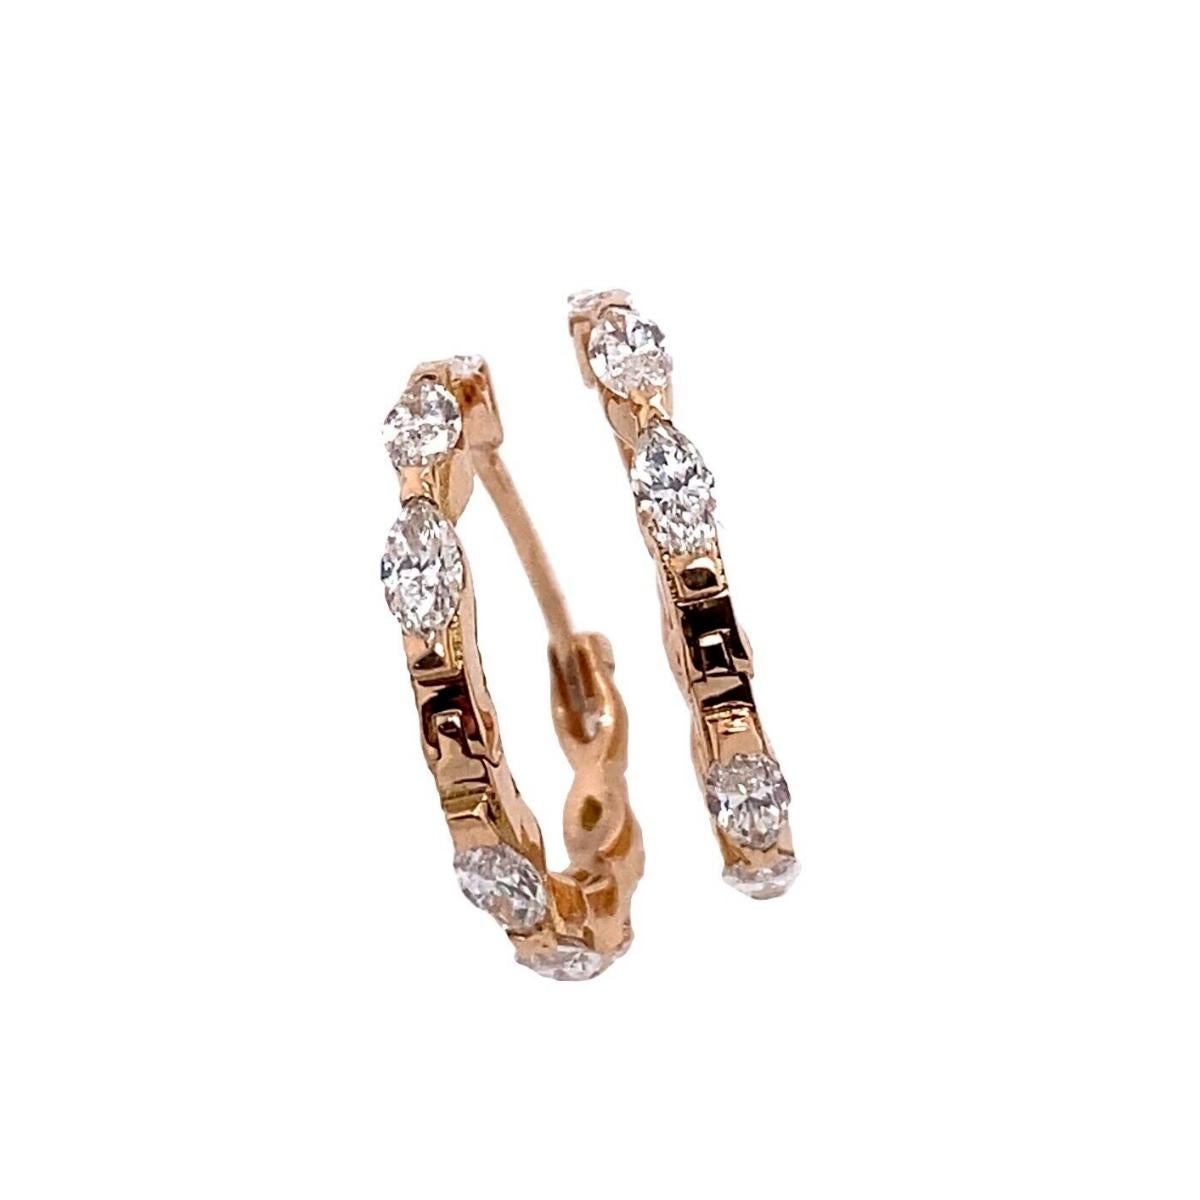 Marquise Diamond Hoop Earrings, In 18ct Rose Gold Set With 1.0ct F/VS Diamonds

The earrings are set 18ct Yellow Gold with 1.00ct of natural marquise cut Diamonds,
15.70mm in size external diameter. It is a great gift for someone